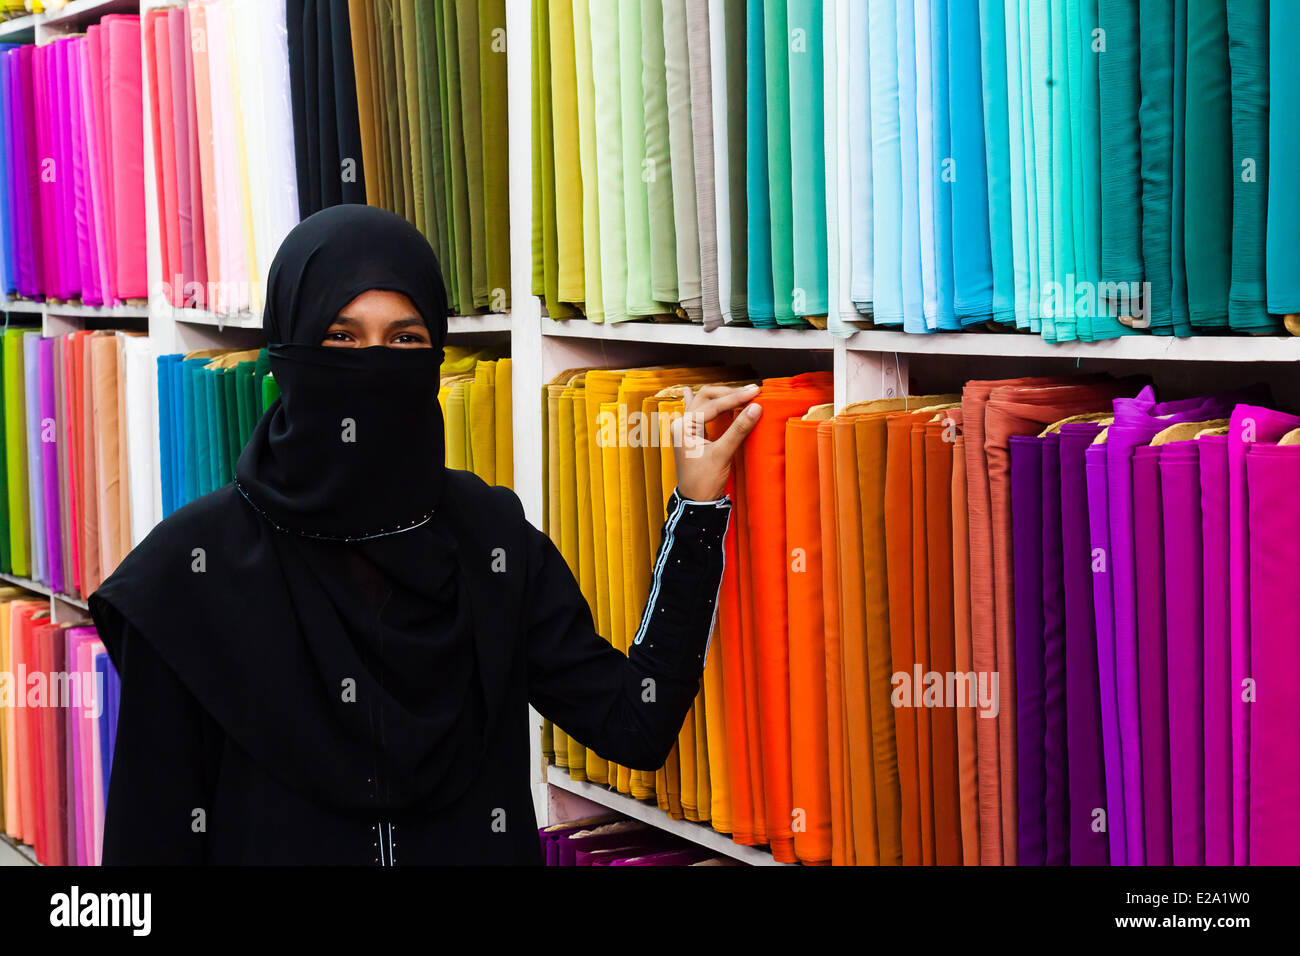 India, Andhra Pradesh state, Hyderabad, Laad bazar, veiled woman in a textile fabric shop Stock Photo